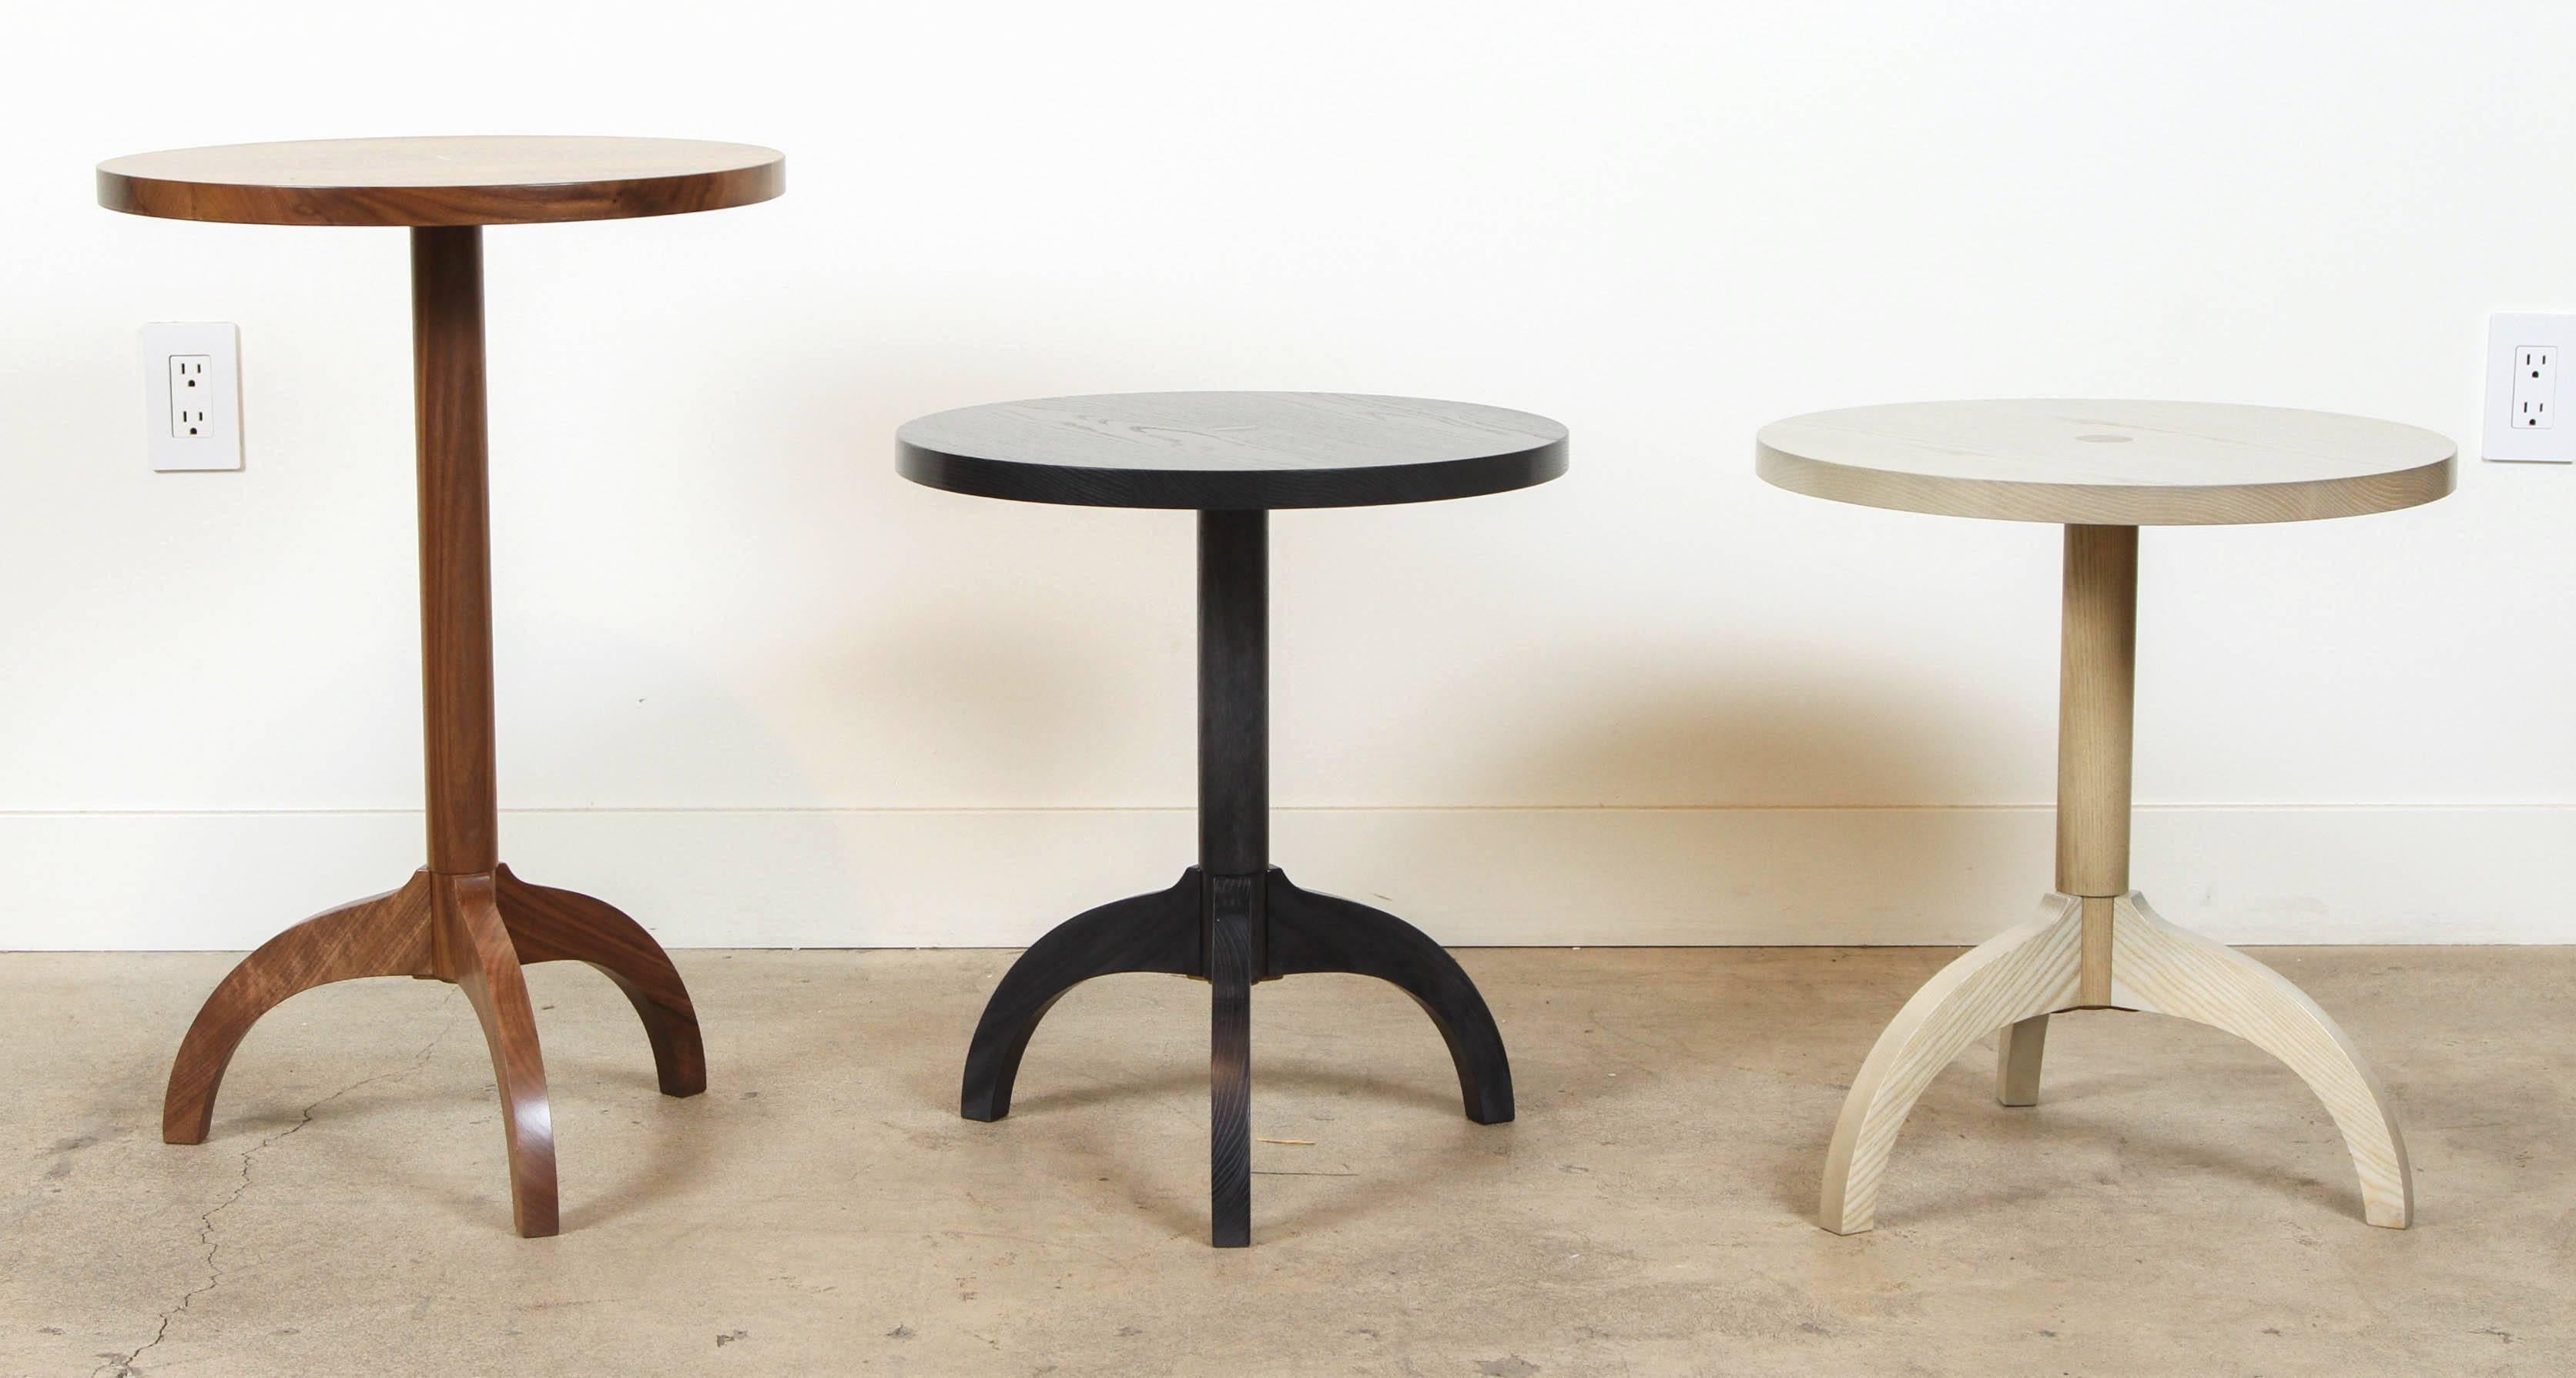 Tripod table by O&G Studio. Comes in two sizes and various finishes. Check for availability. 

Tall: $620.
Dimensions: 18